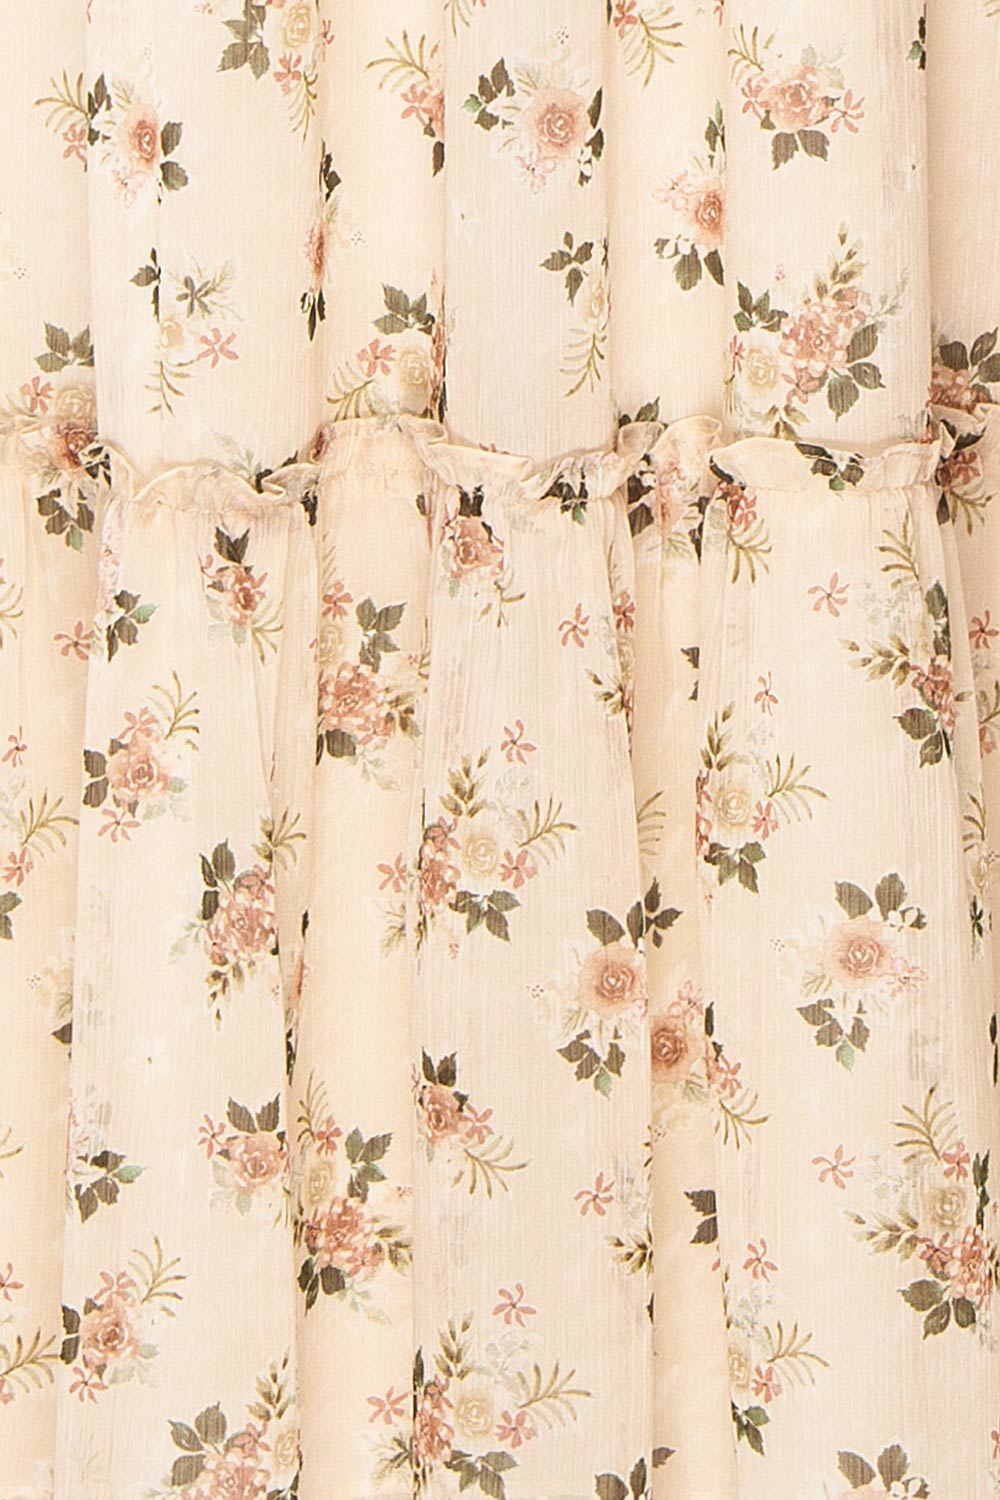 Weald Floral Tiered Midi Dress | Boutique 1861 fabric 